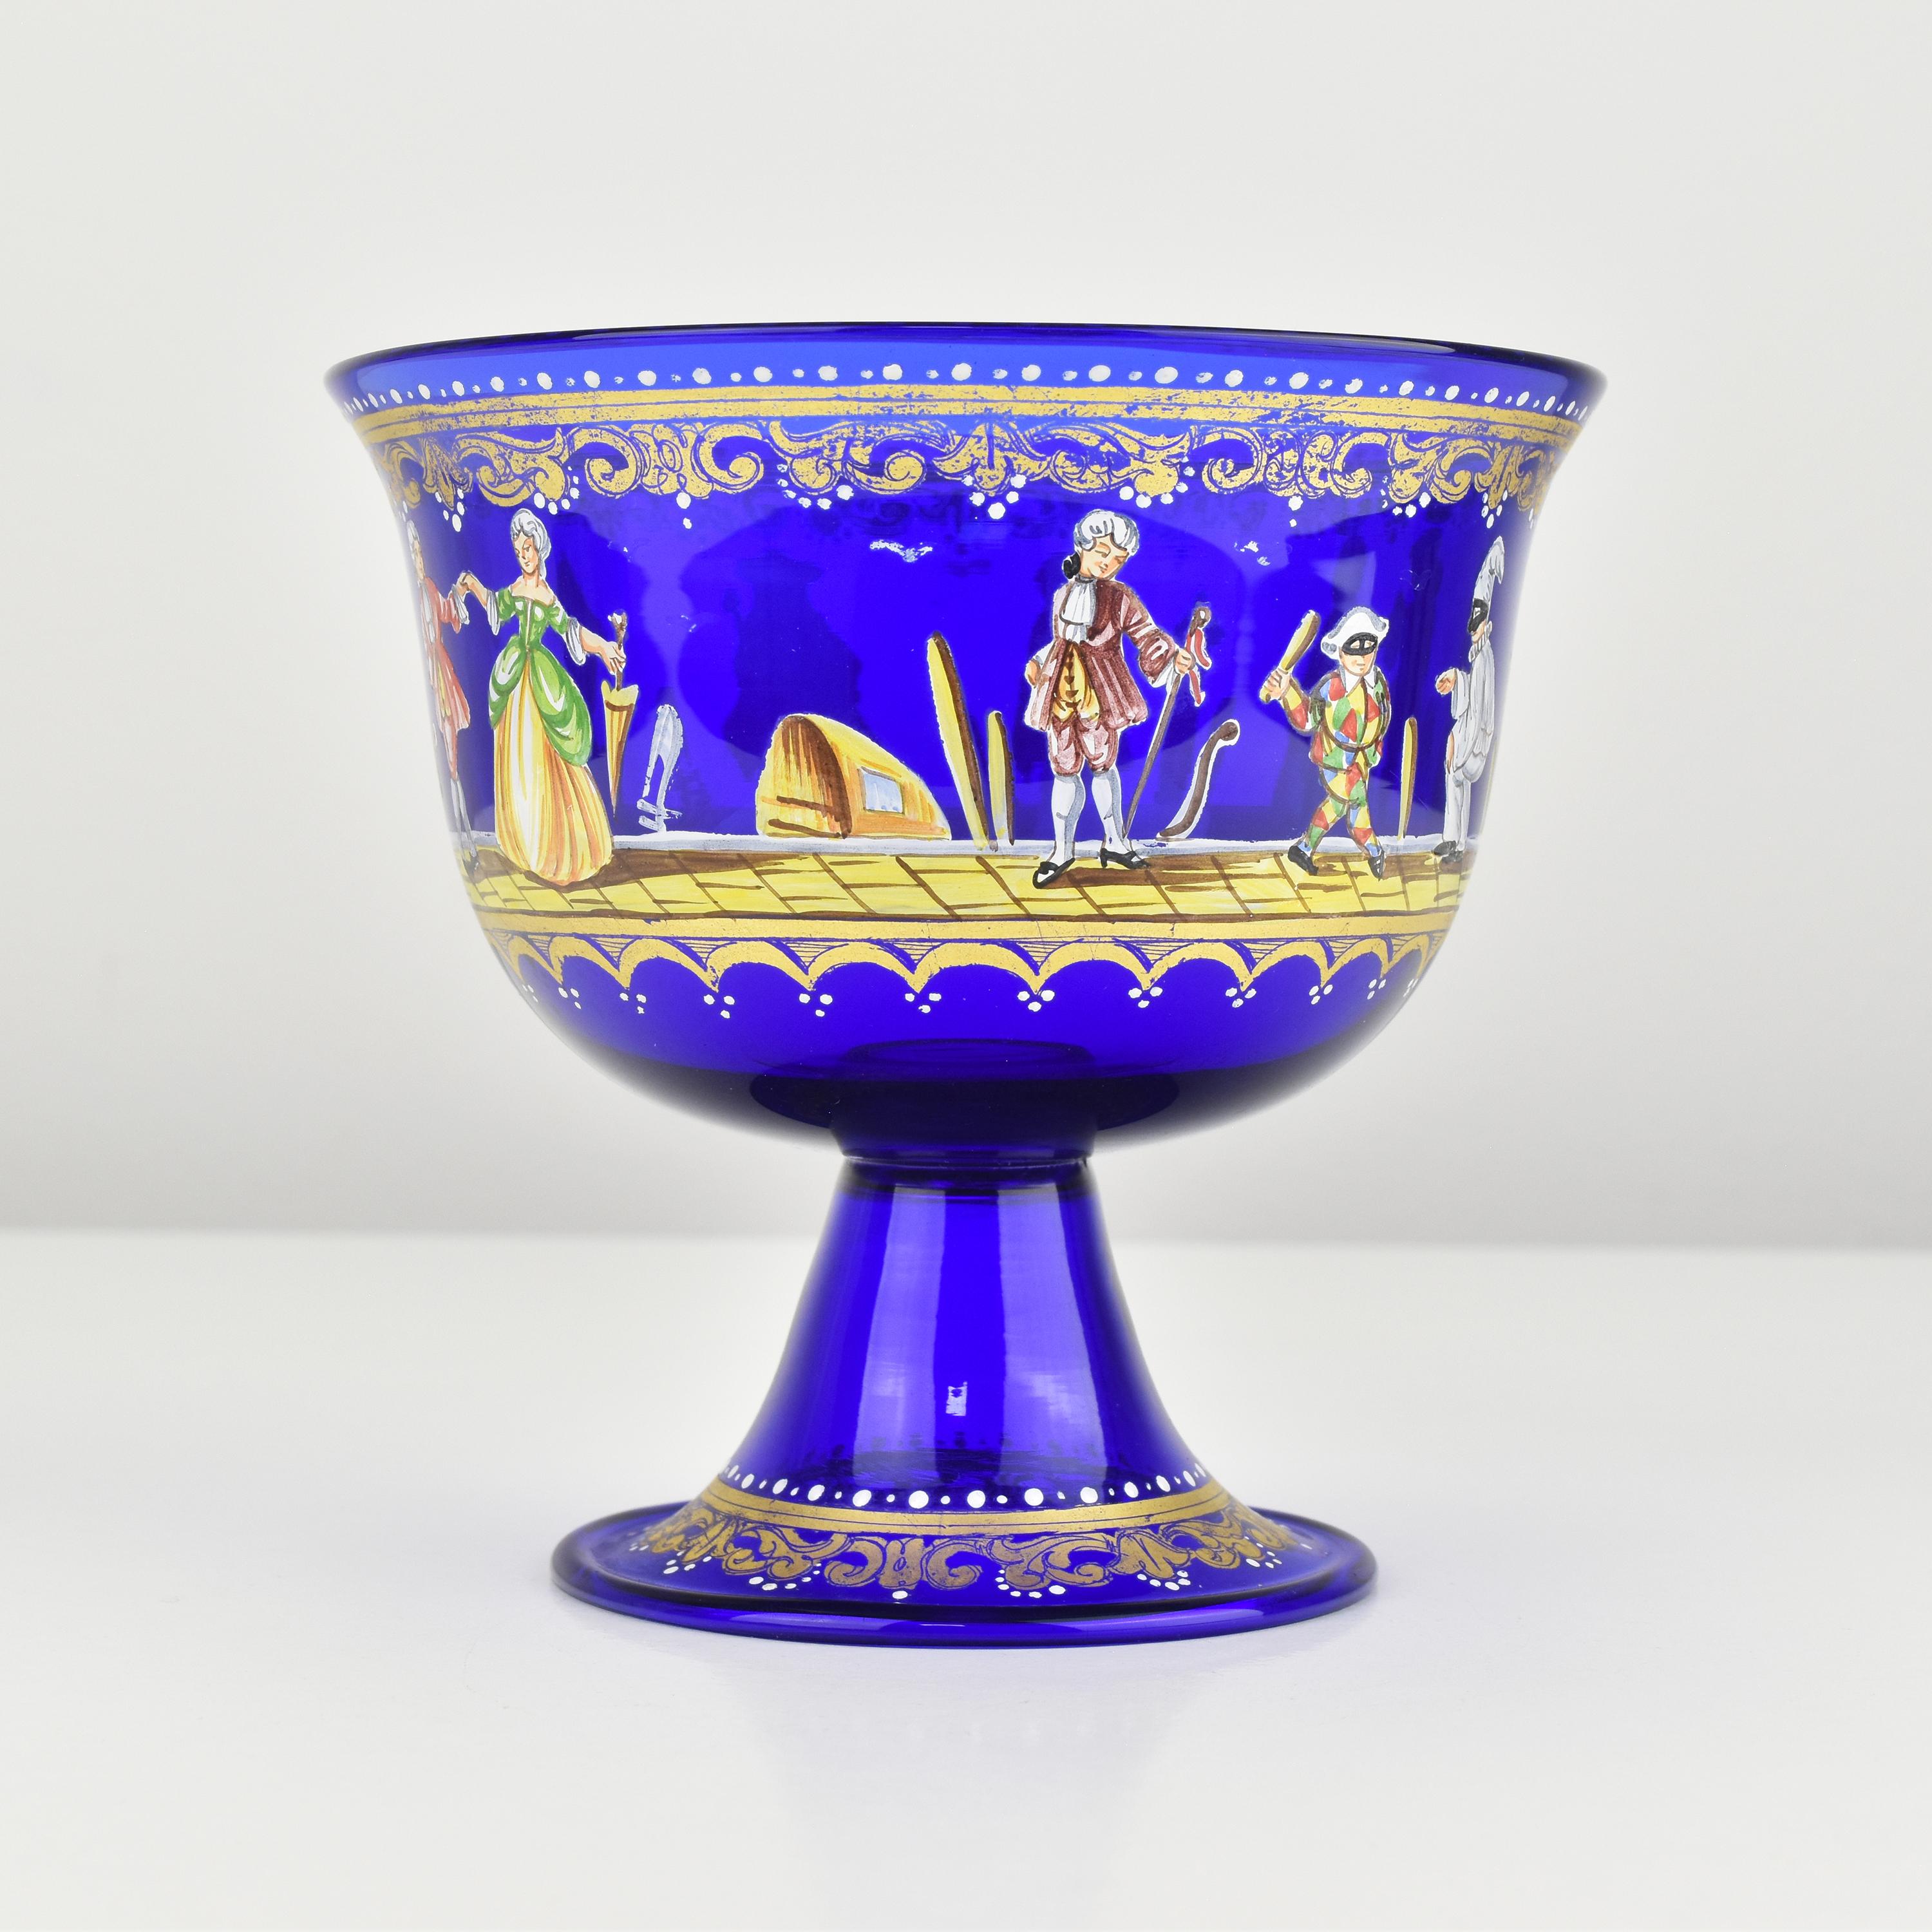 Antique Barovier & Toso Wedding Cup Reproduction Grand Tour Cobal Blue w. Enamel In Good Condition For Sale In Bad Säckingen, DE